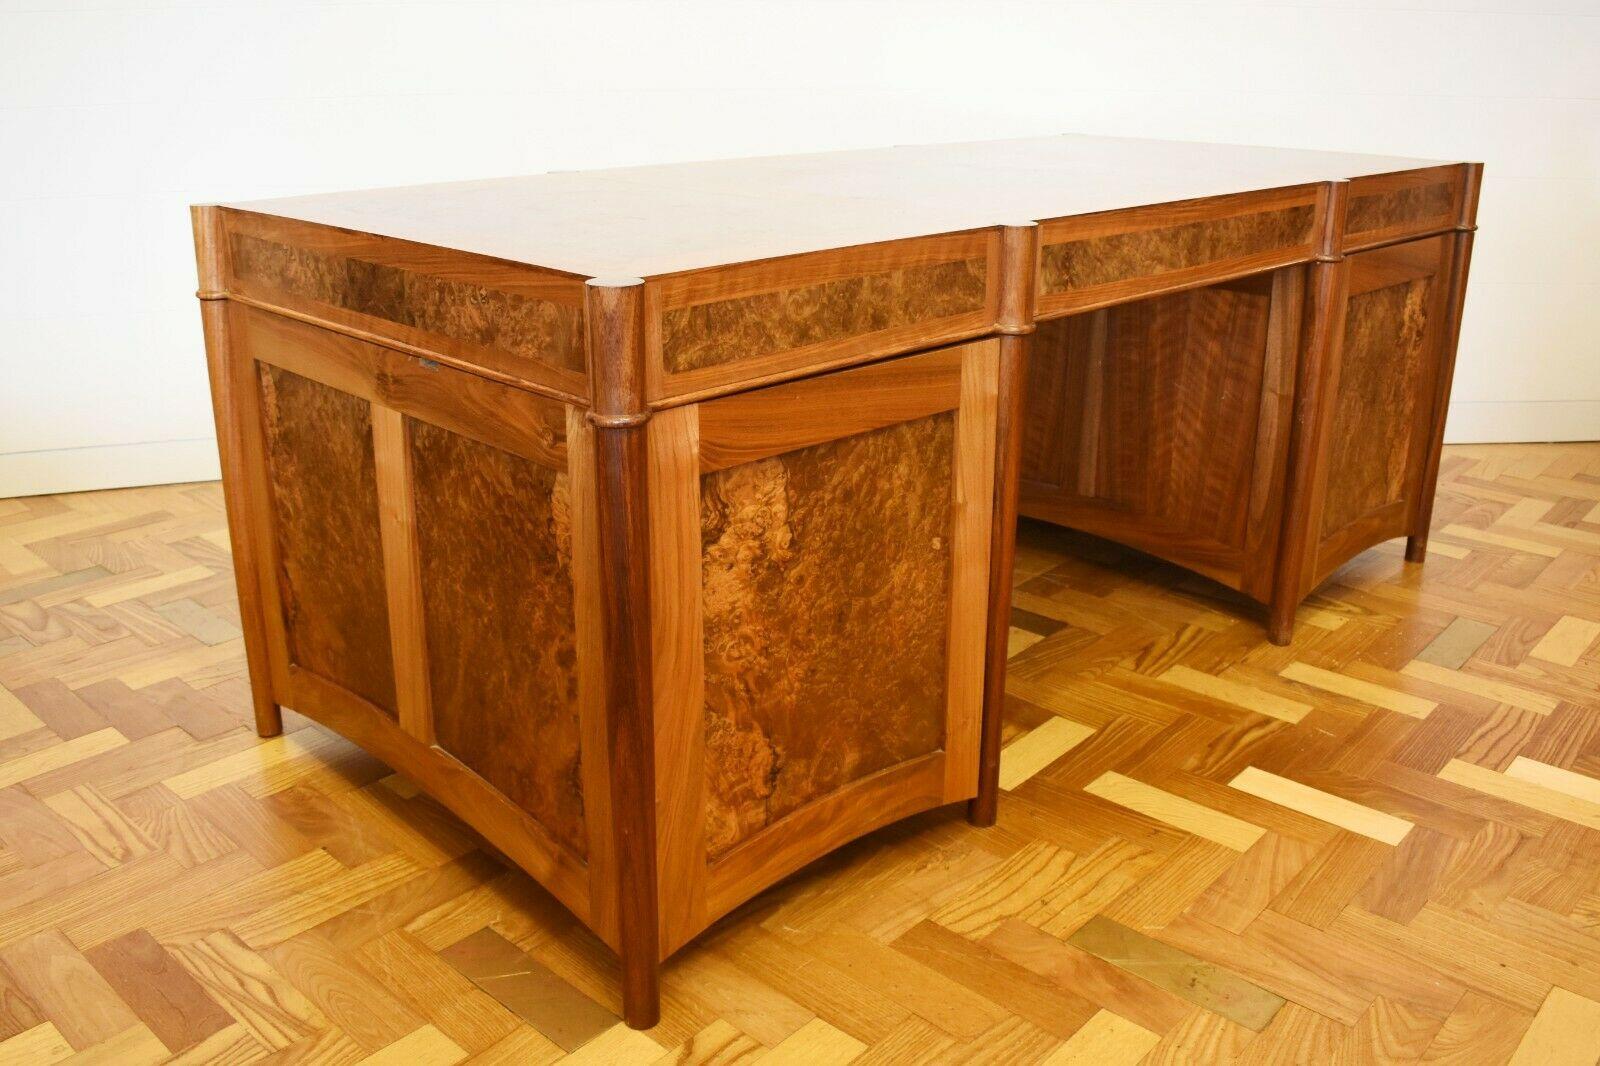 This is a burr walnut bespoke made desk by Nick Karey for The Brake c.2000's

The rectangular top sits above three frieze drawers and two cupboard doors, set upon cylindrical supports. One of these cupboards conceals two drawers, which are perfect